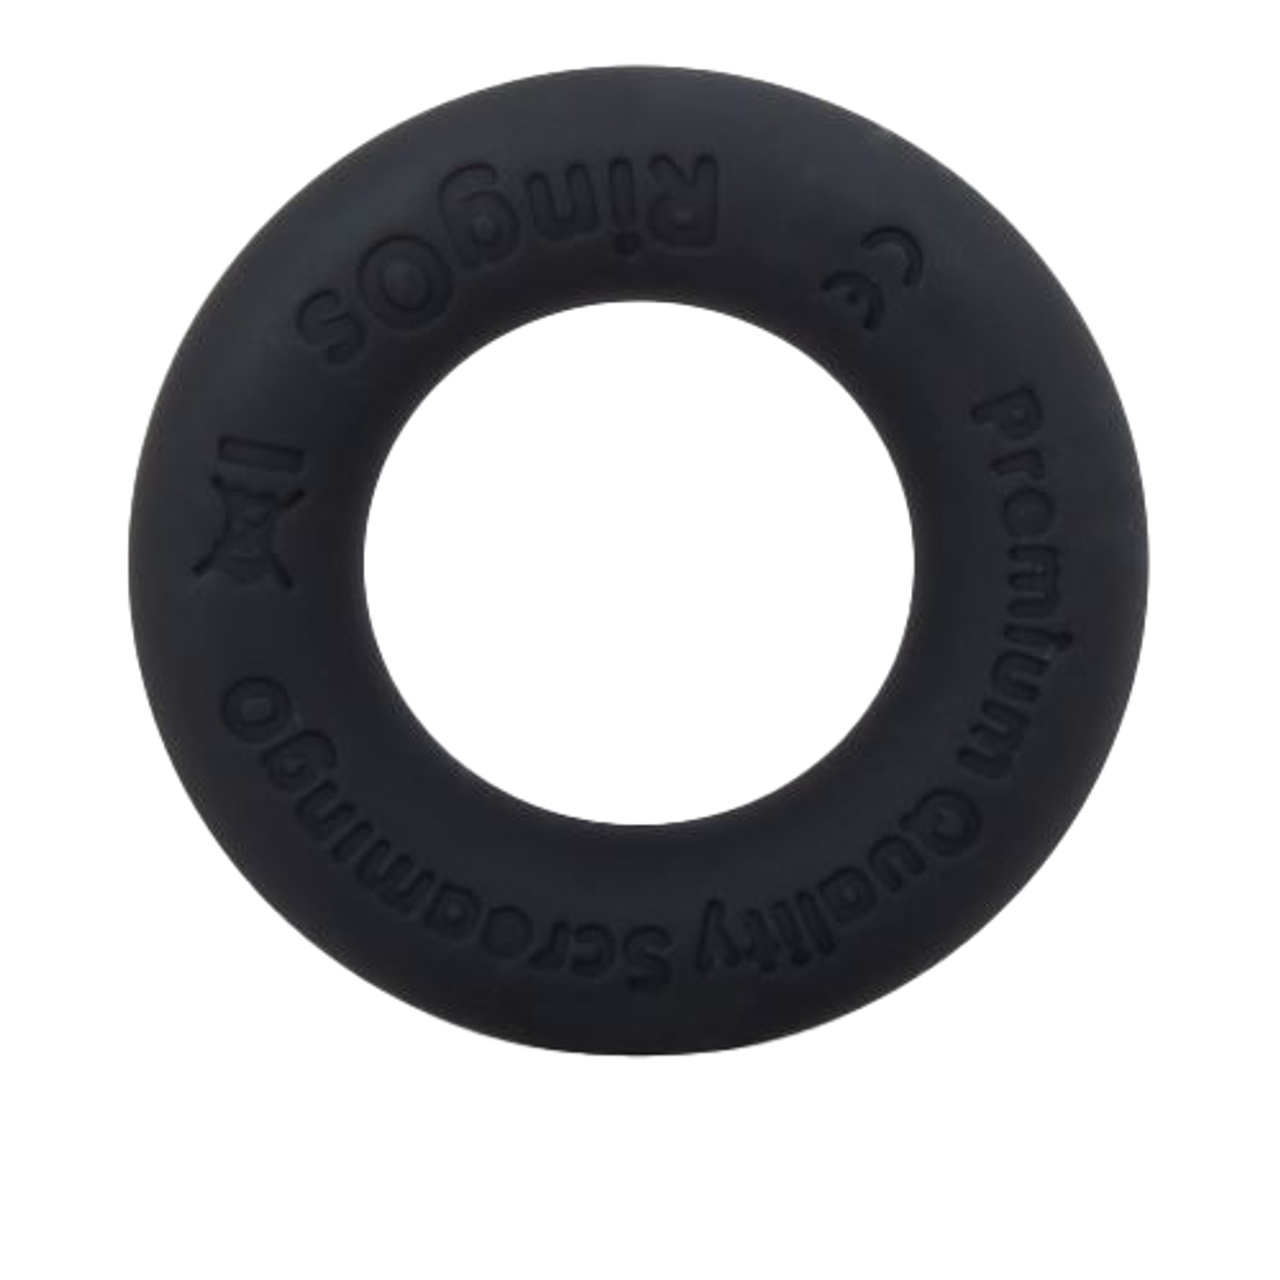 Buy erection rings online like Screaming O Ring o Ritz cock ring from Condom Depot